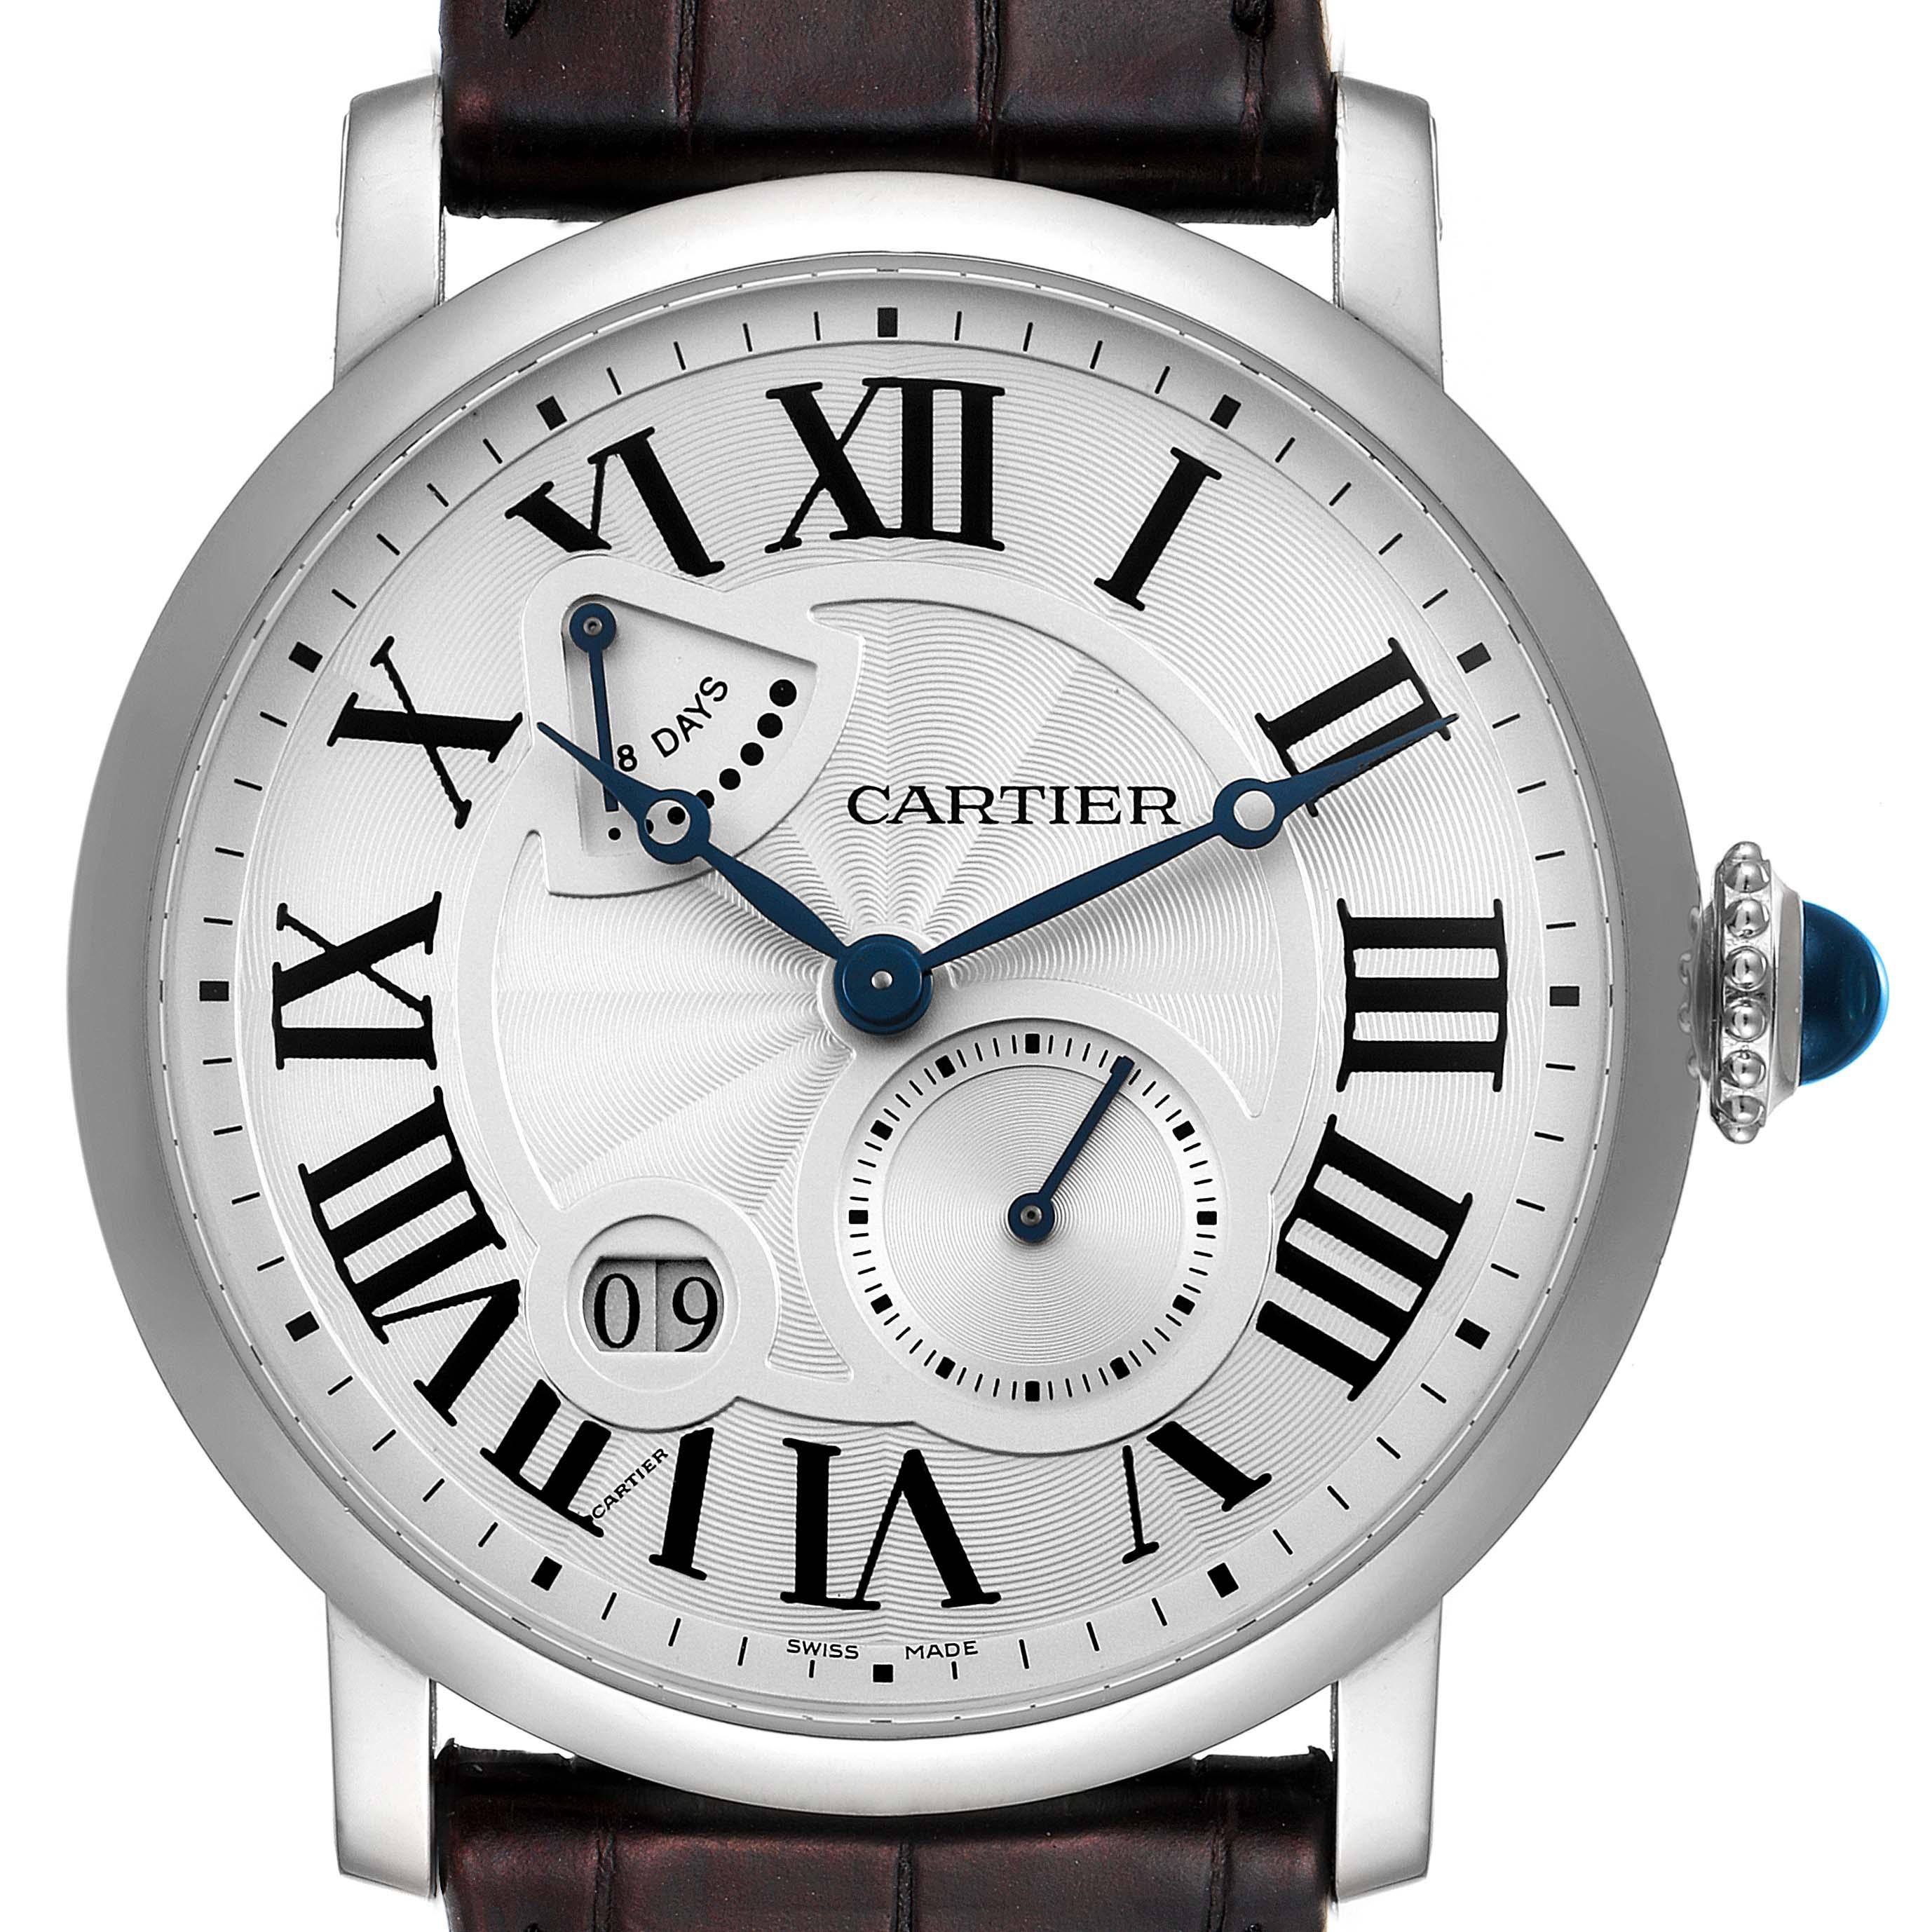 Cartier Rotonde Silver Dial White Gold Mens Watch W1556202. Manual winding movement. 18k white gold case 42.0 mm in diameter. Circular grained crown set with the blue spinel cabochon. Exhibition sapphire crystal case back. . Scratch resistant